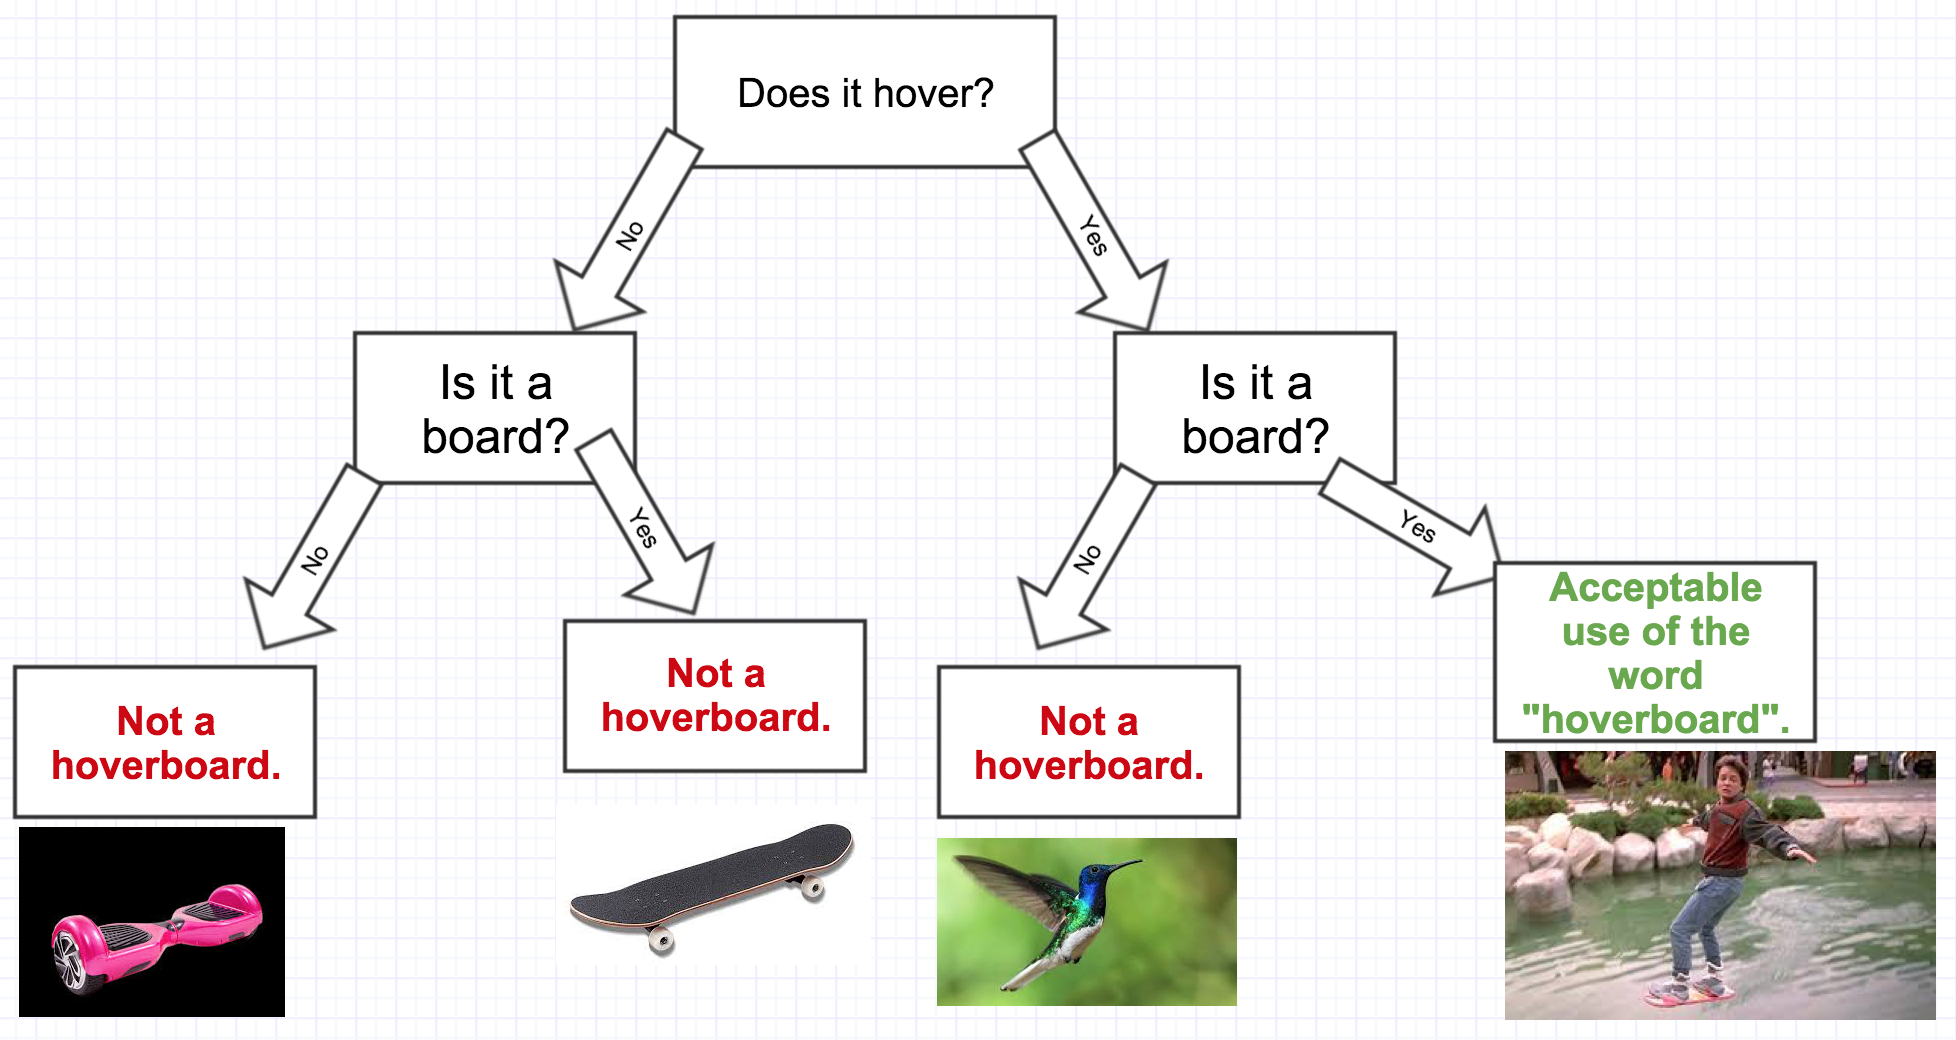 handy flowchart - Does it hover? Is it a board? Is it a board? Not a hoverboard. Acceptable use of the word "hoverboard" Not a hoverboard Not a hoverboard.